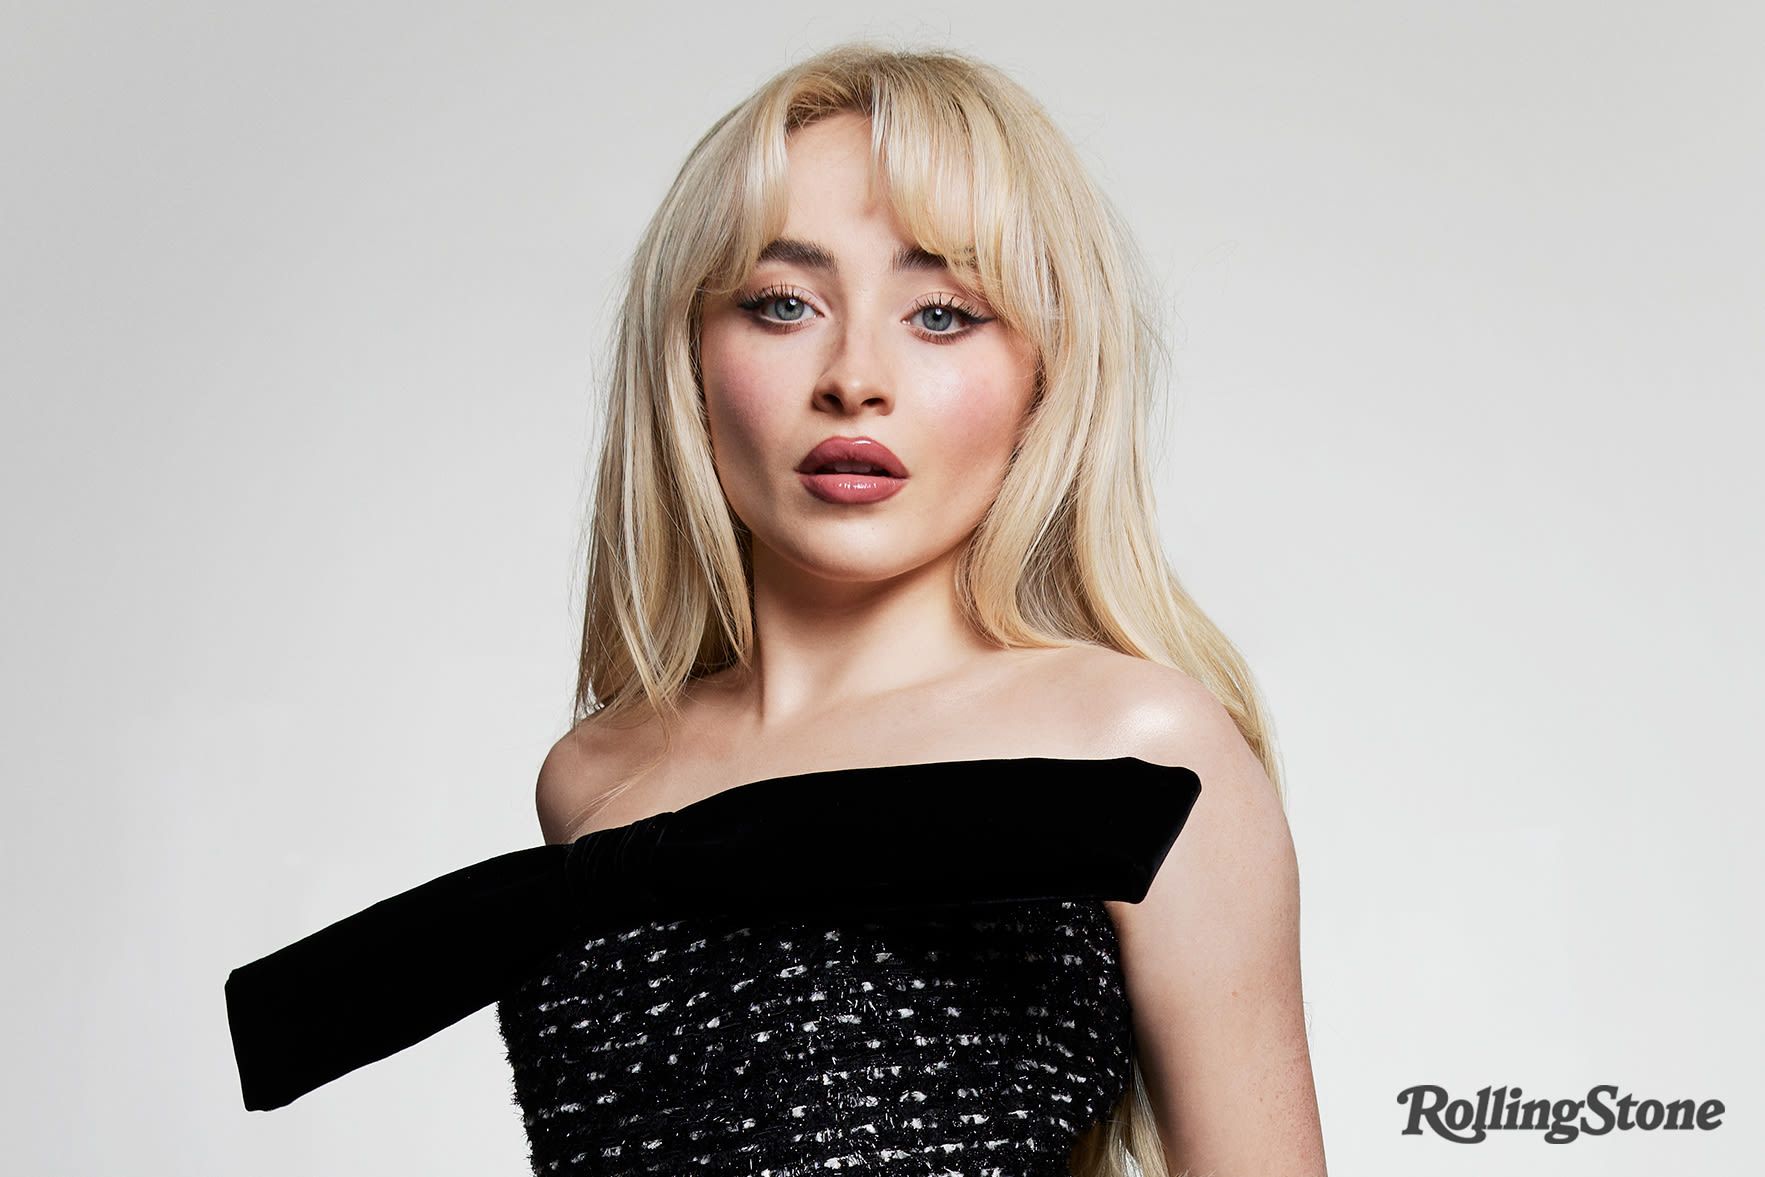 Everything We Know About Sabrina Carpenter’s New Album ‘Short n’ Sweet’